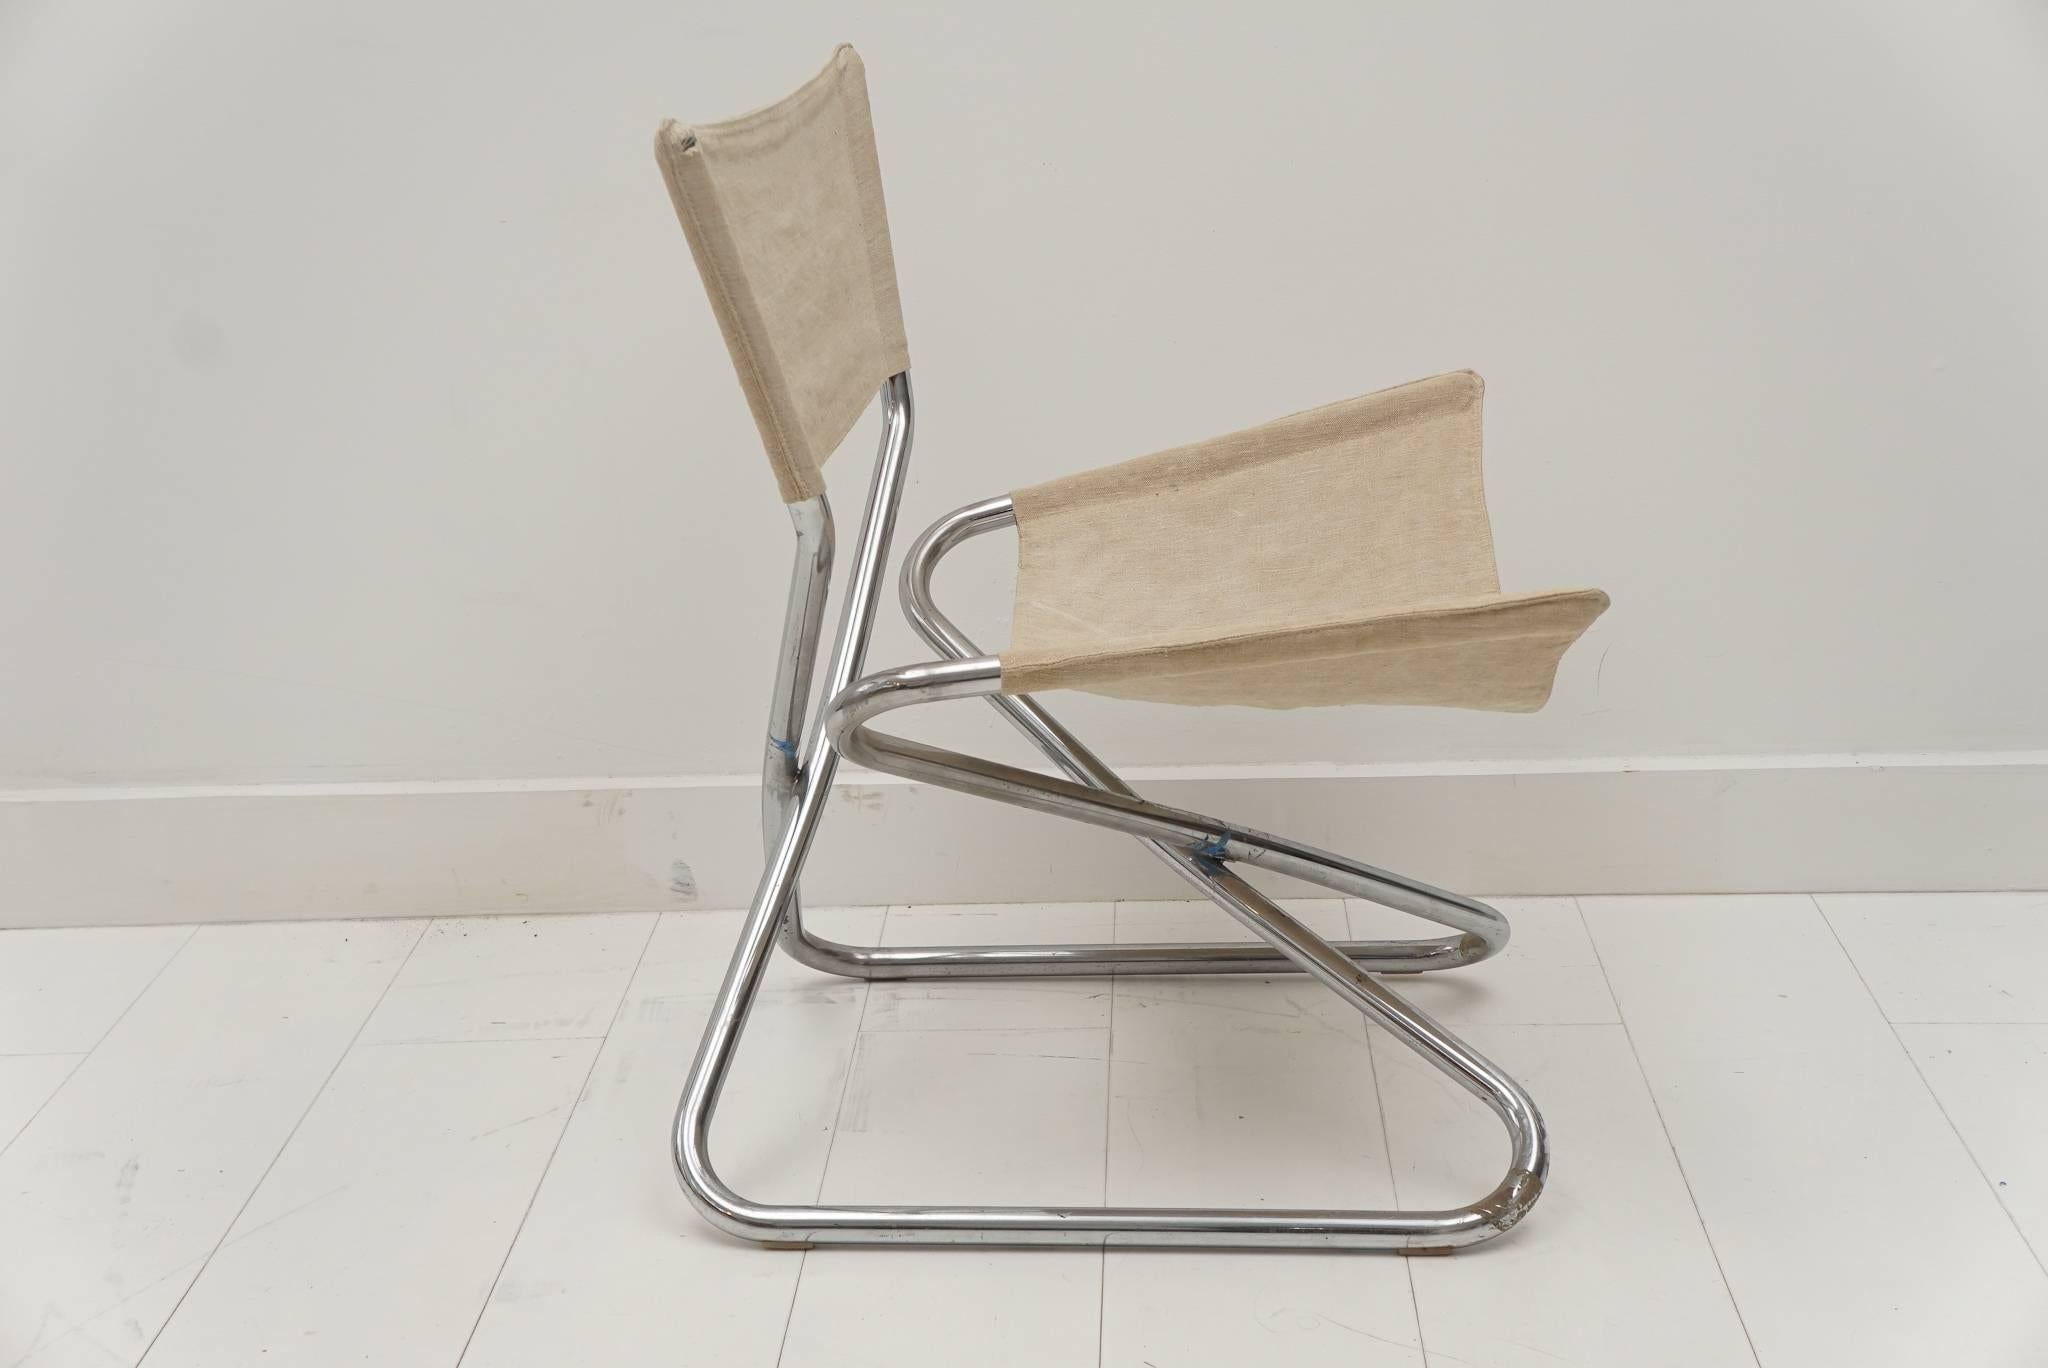 Polished chrome tubular folding chair with linen seat and backrest.